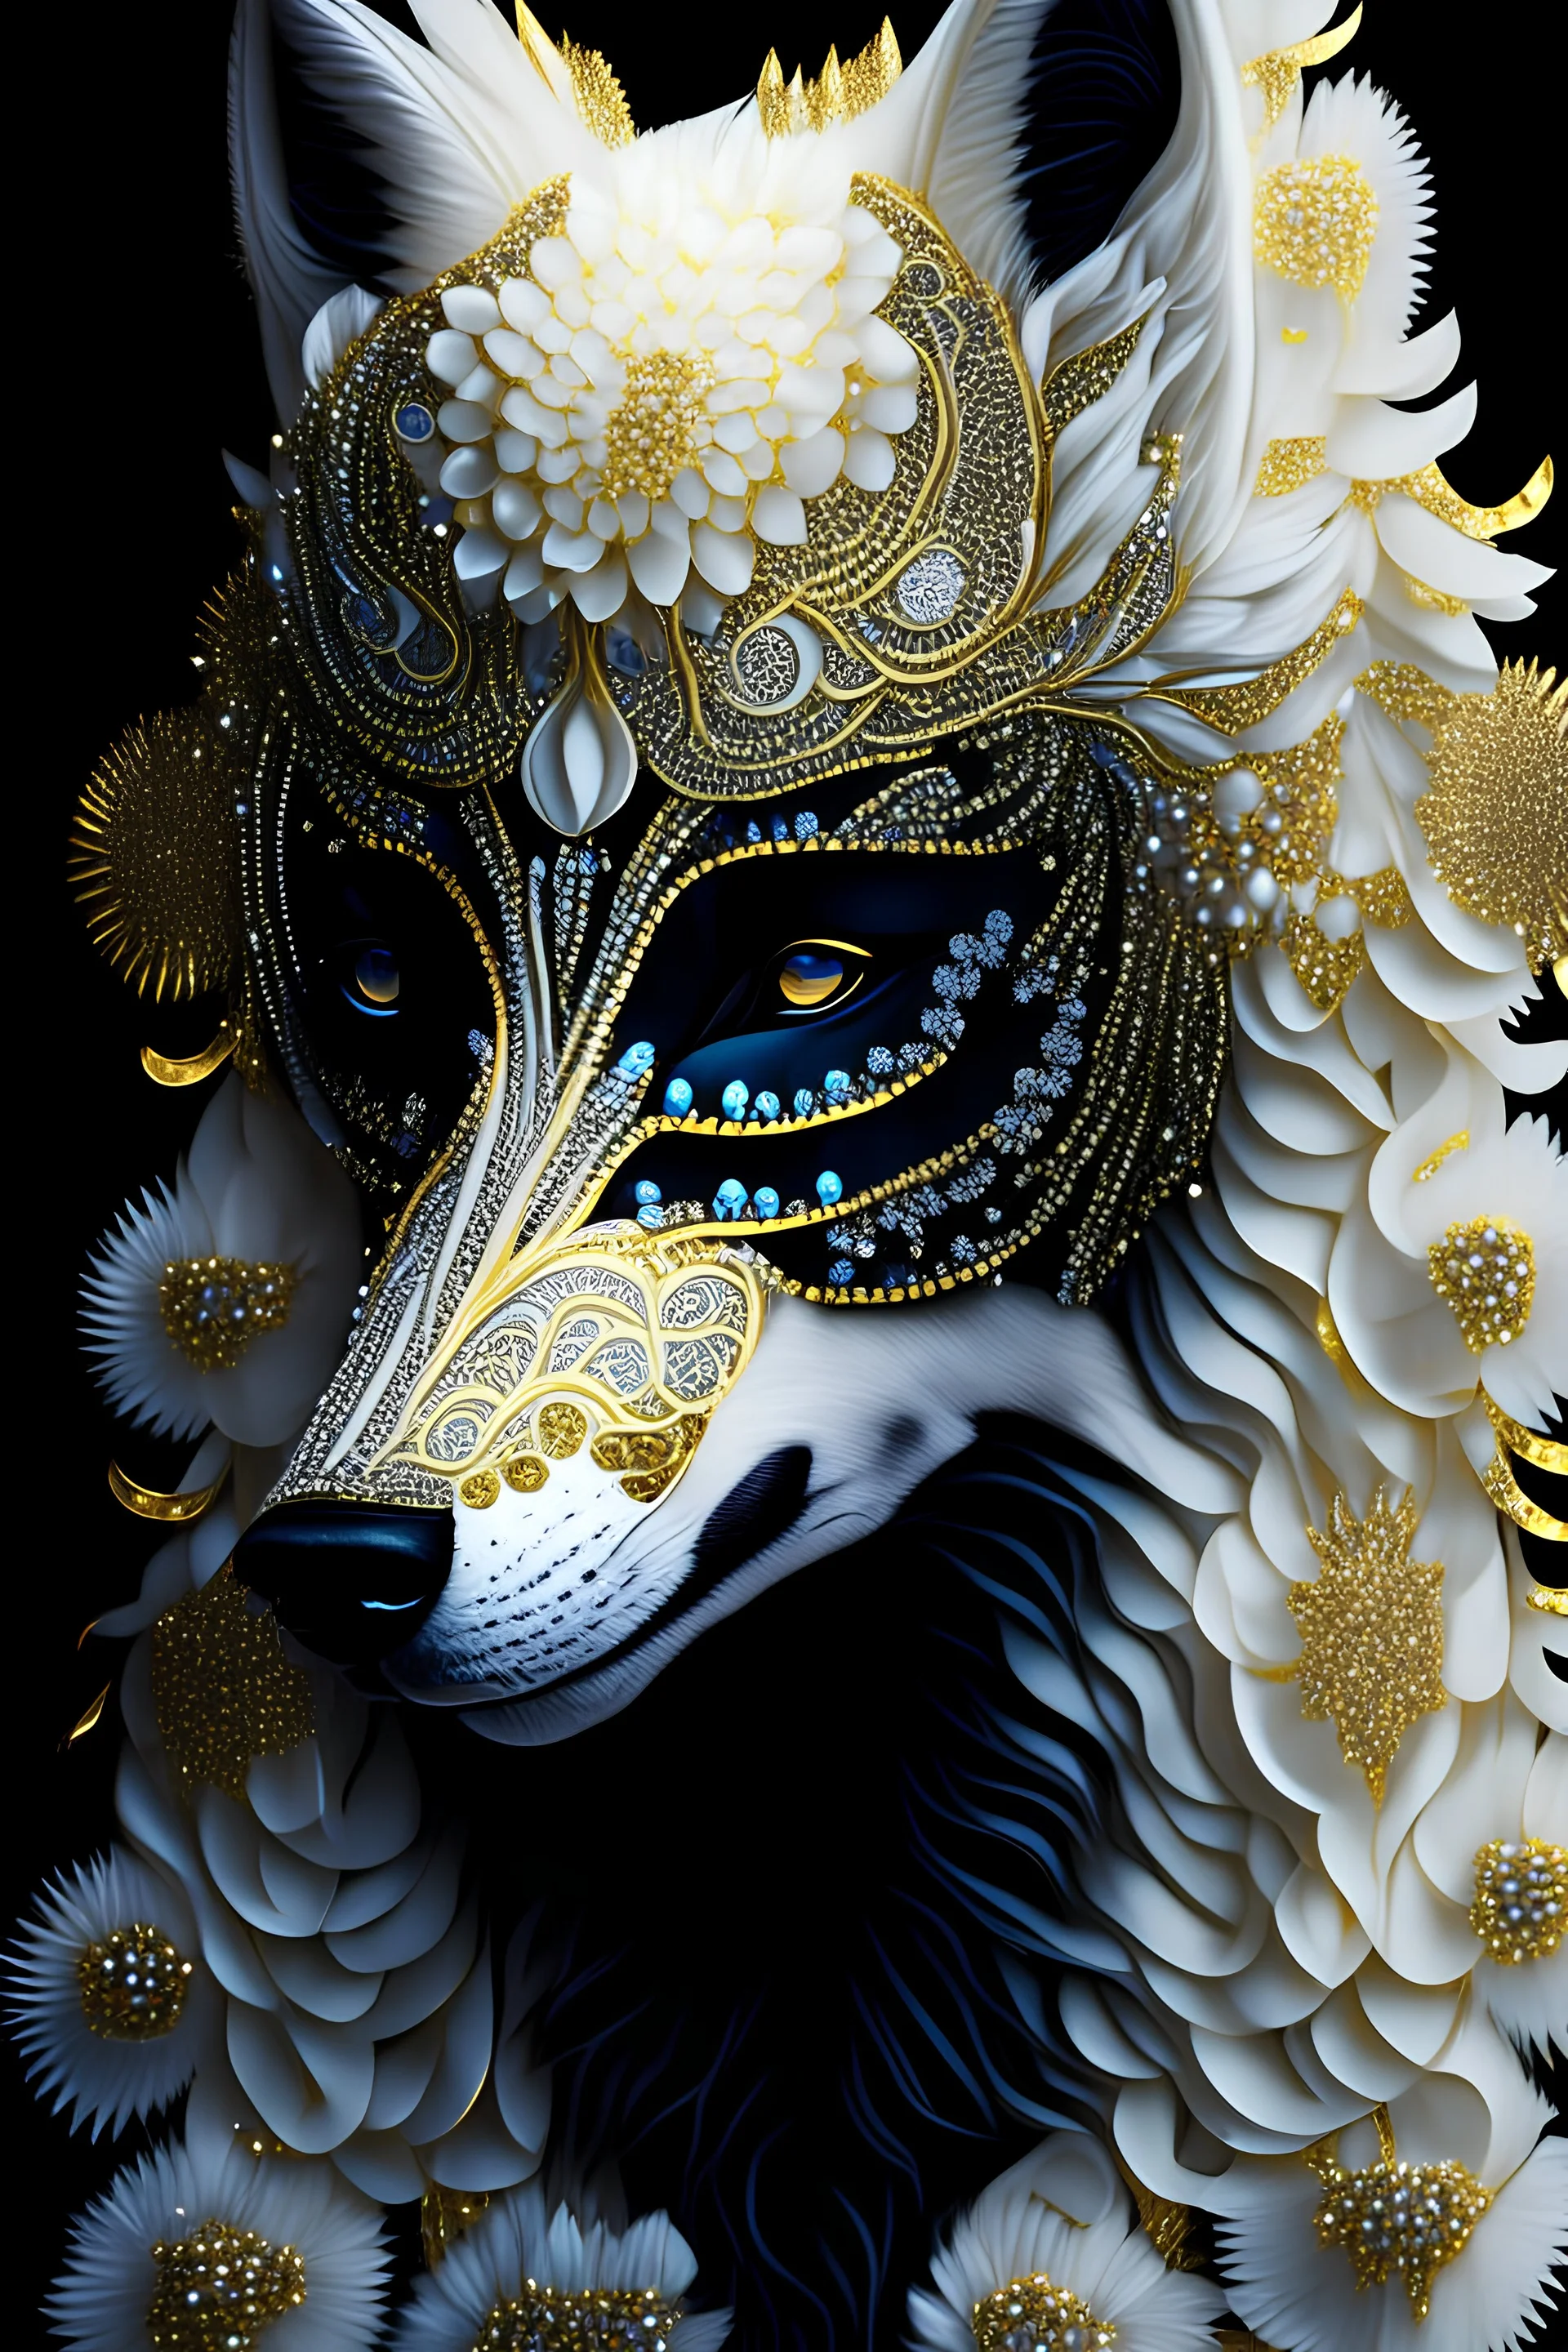 white and gold bioluminescence gradient Wolf portrait, textured detailed fur adorned with bioluminescence malachit colour rennaisance style black and white and Golden pearls, beads and black diamond headdress and masque, black lily florals, organic bio spinal ribbed detail of detailed creative rennaisance style ornate lwhite colour florwers background moonlight background extremely detailed hyperrealistic maximálist concept art